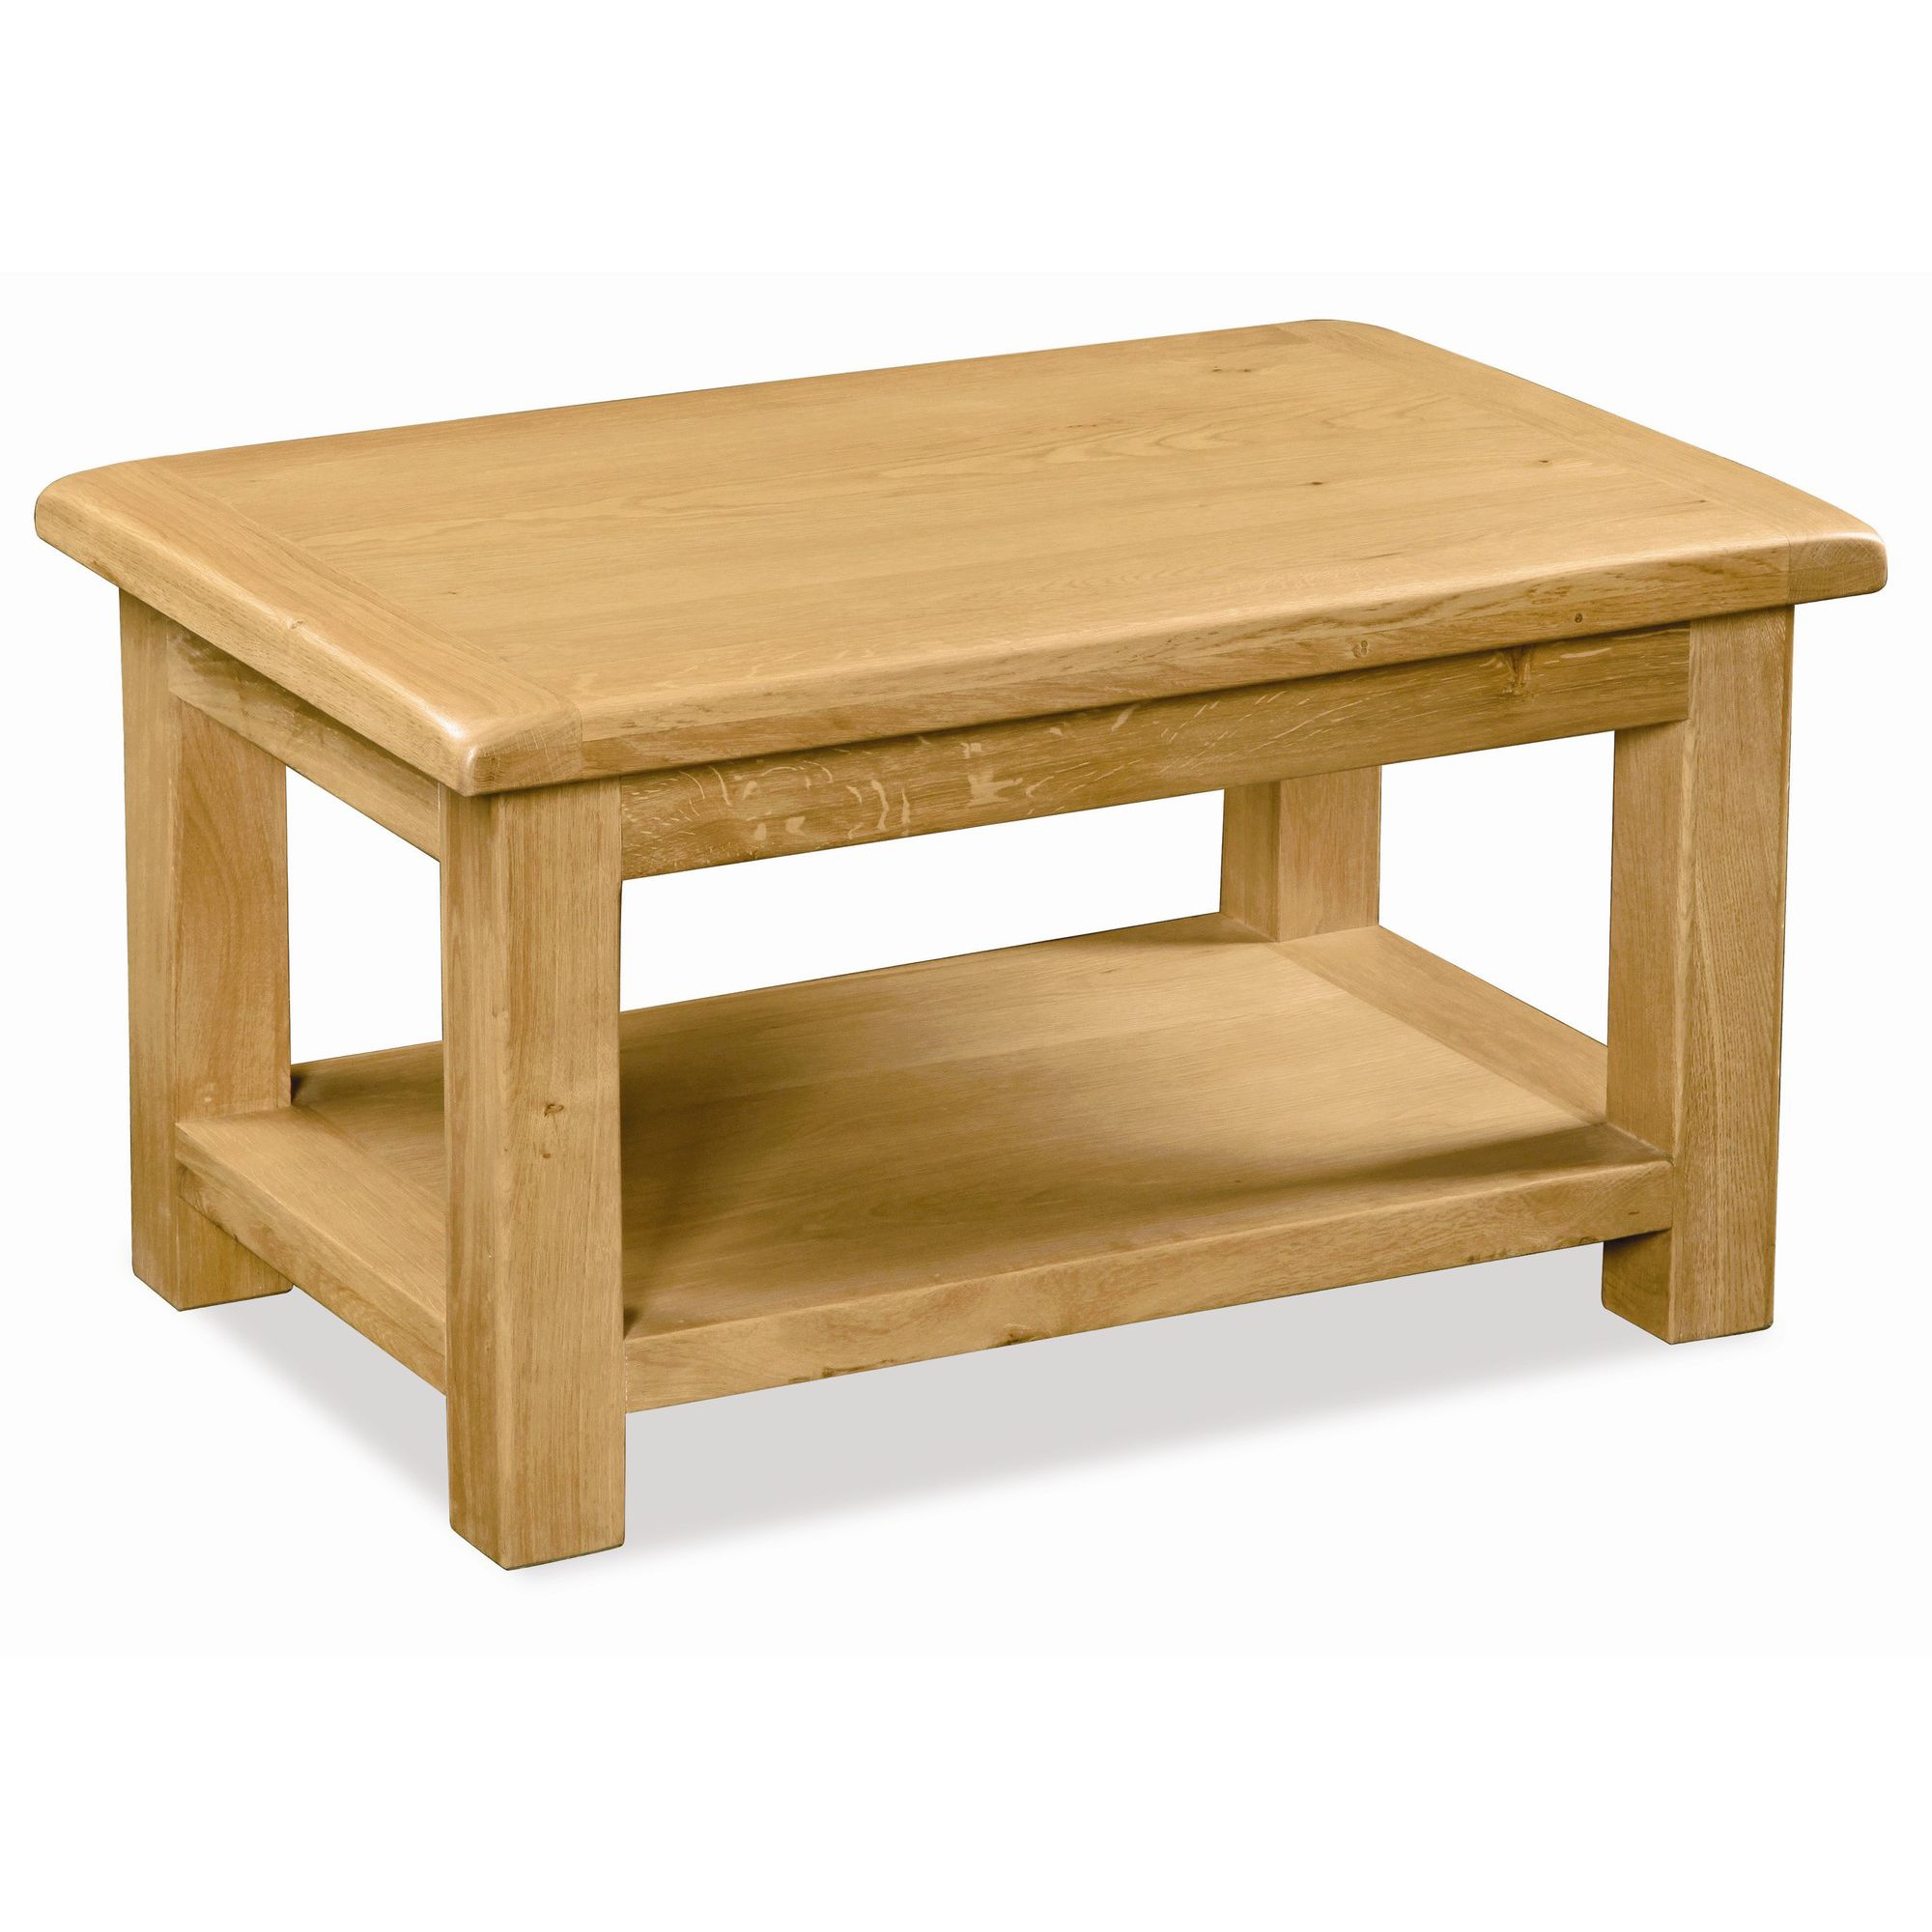 Alterton Furniture Pemberley Coffee Table - Small at Tesco Direct